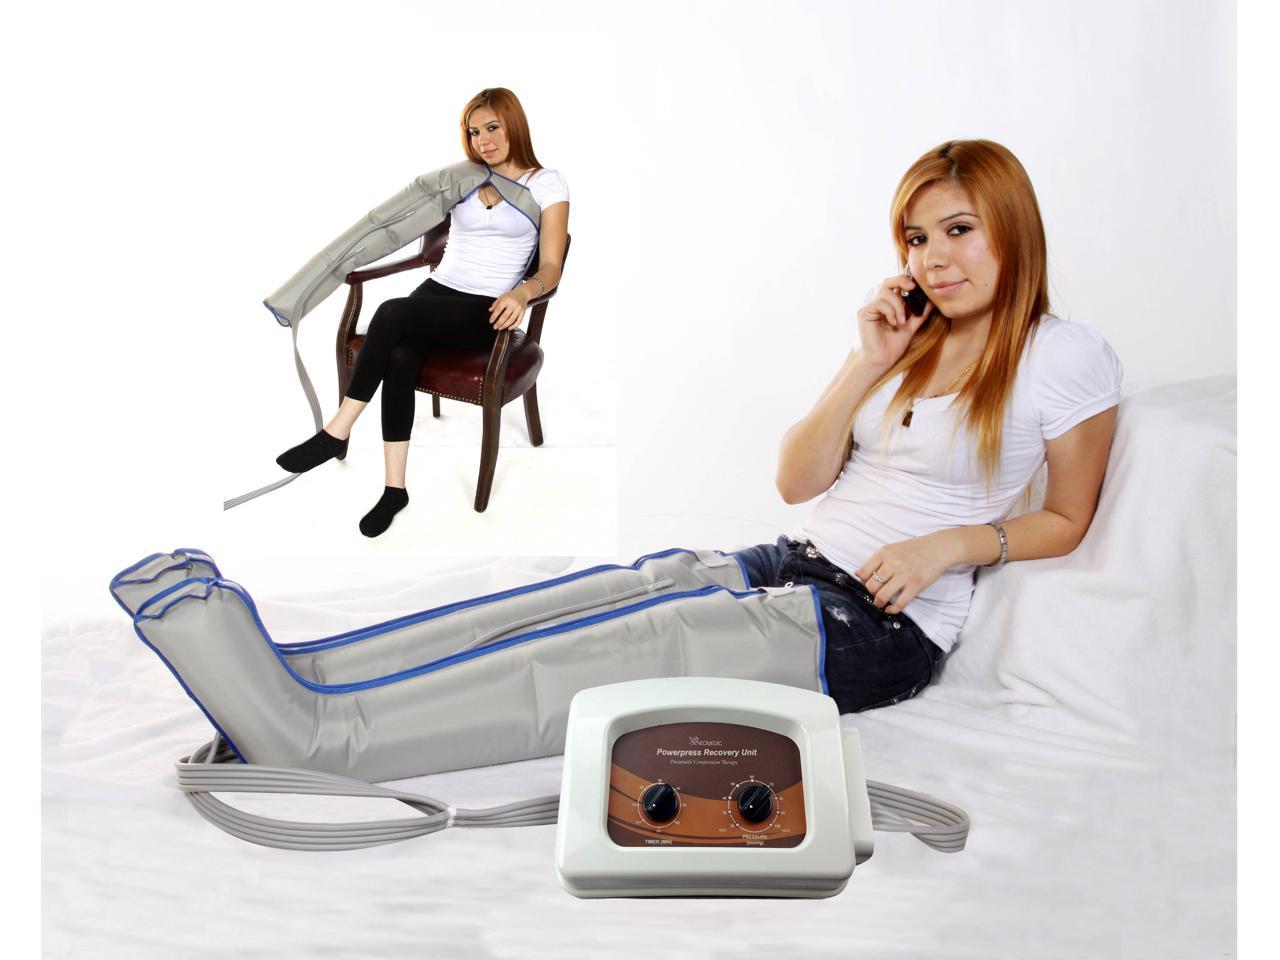 Air Sequential Compression Leg Massager Full Leg Sleeve Complete Set X Large 4920